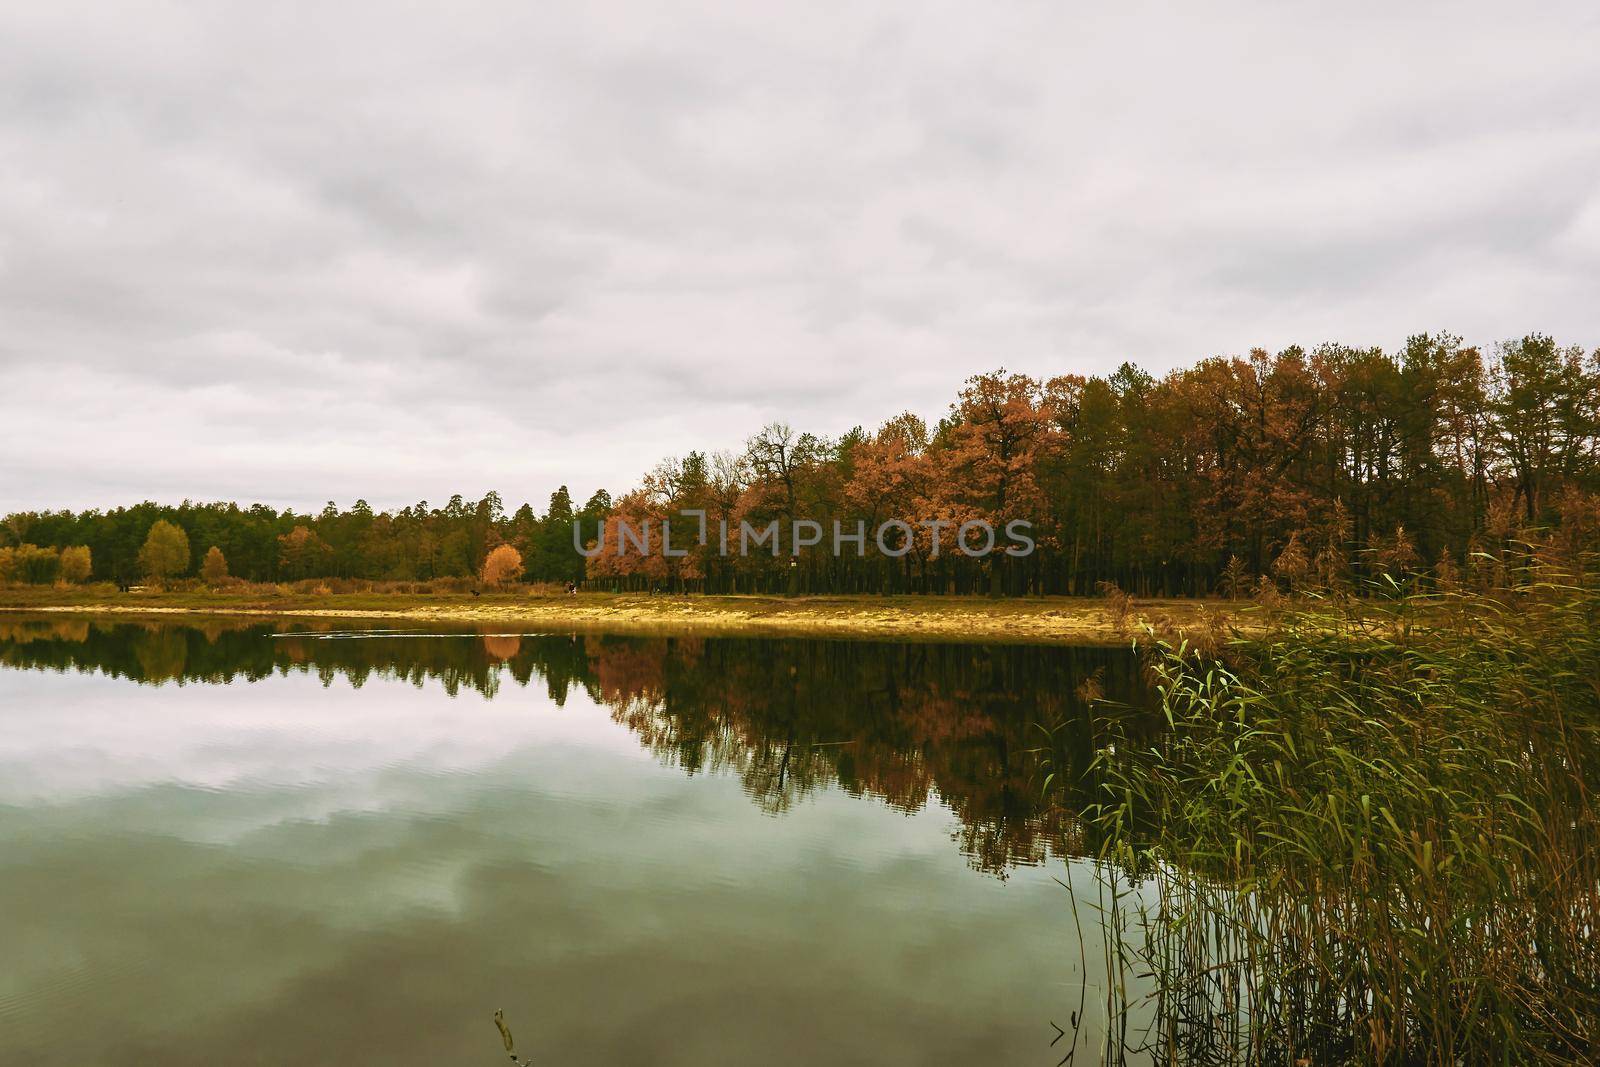 Autumn is the most colorful time of the year, when nature changes its usual appearance to golden colors in glimpses.Calm serene expanse of the autumn lake and an orange forest on the shore